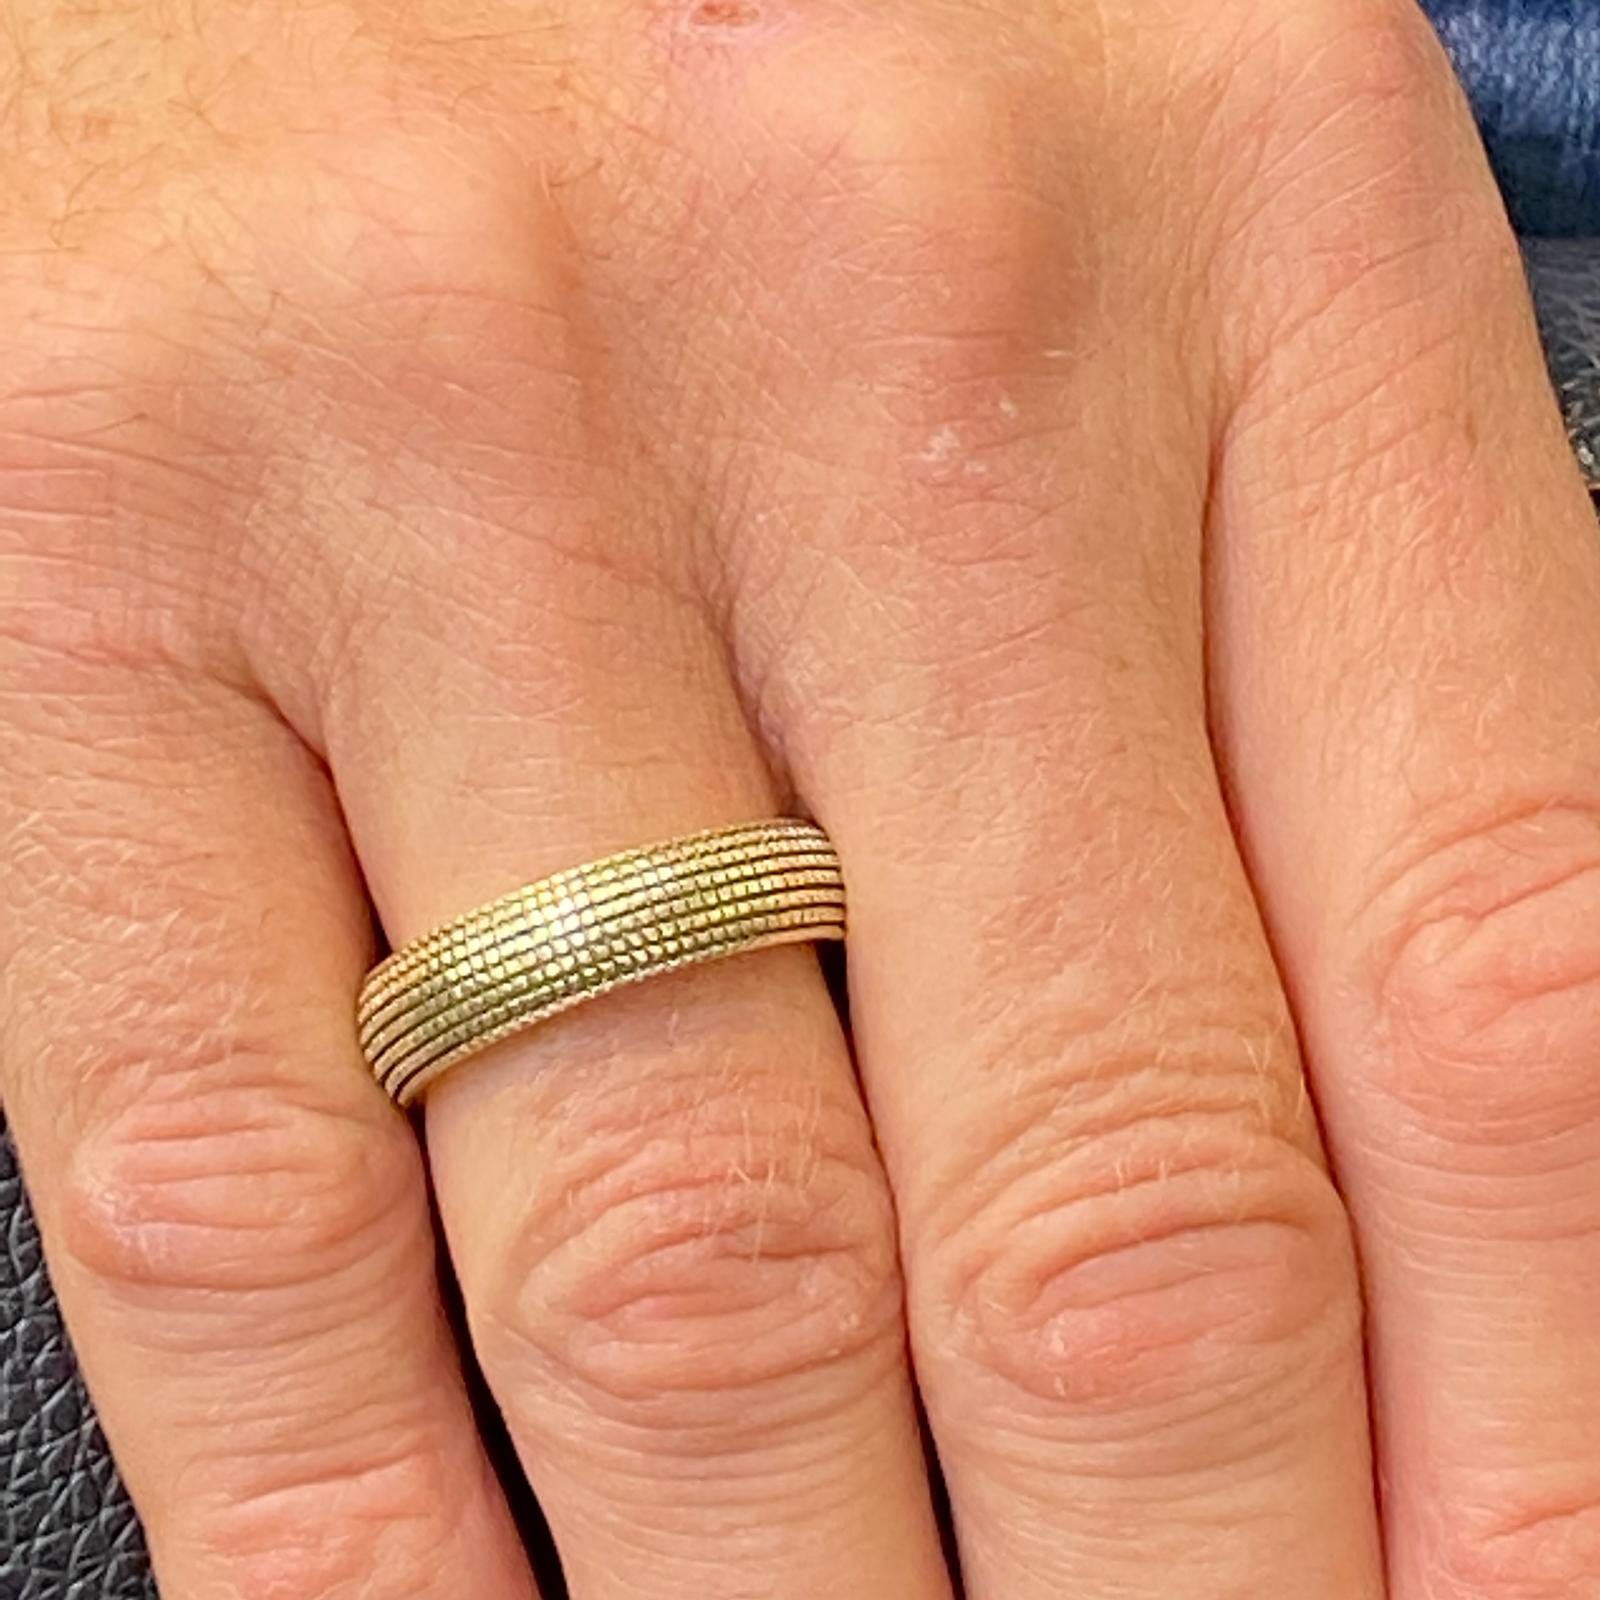 David Yurman 6mm Sky band ring fashioned in 18 karat yellow gold. The band features a unique blackened grid style pattern and is size 9.75. Signed David Yurman 750. 

